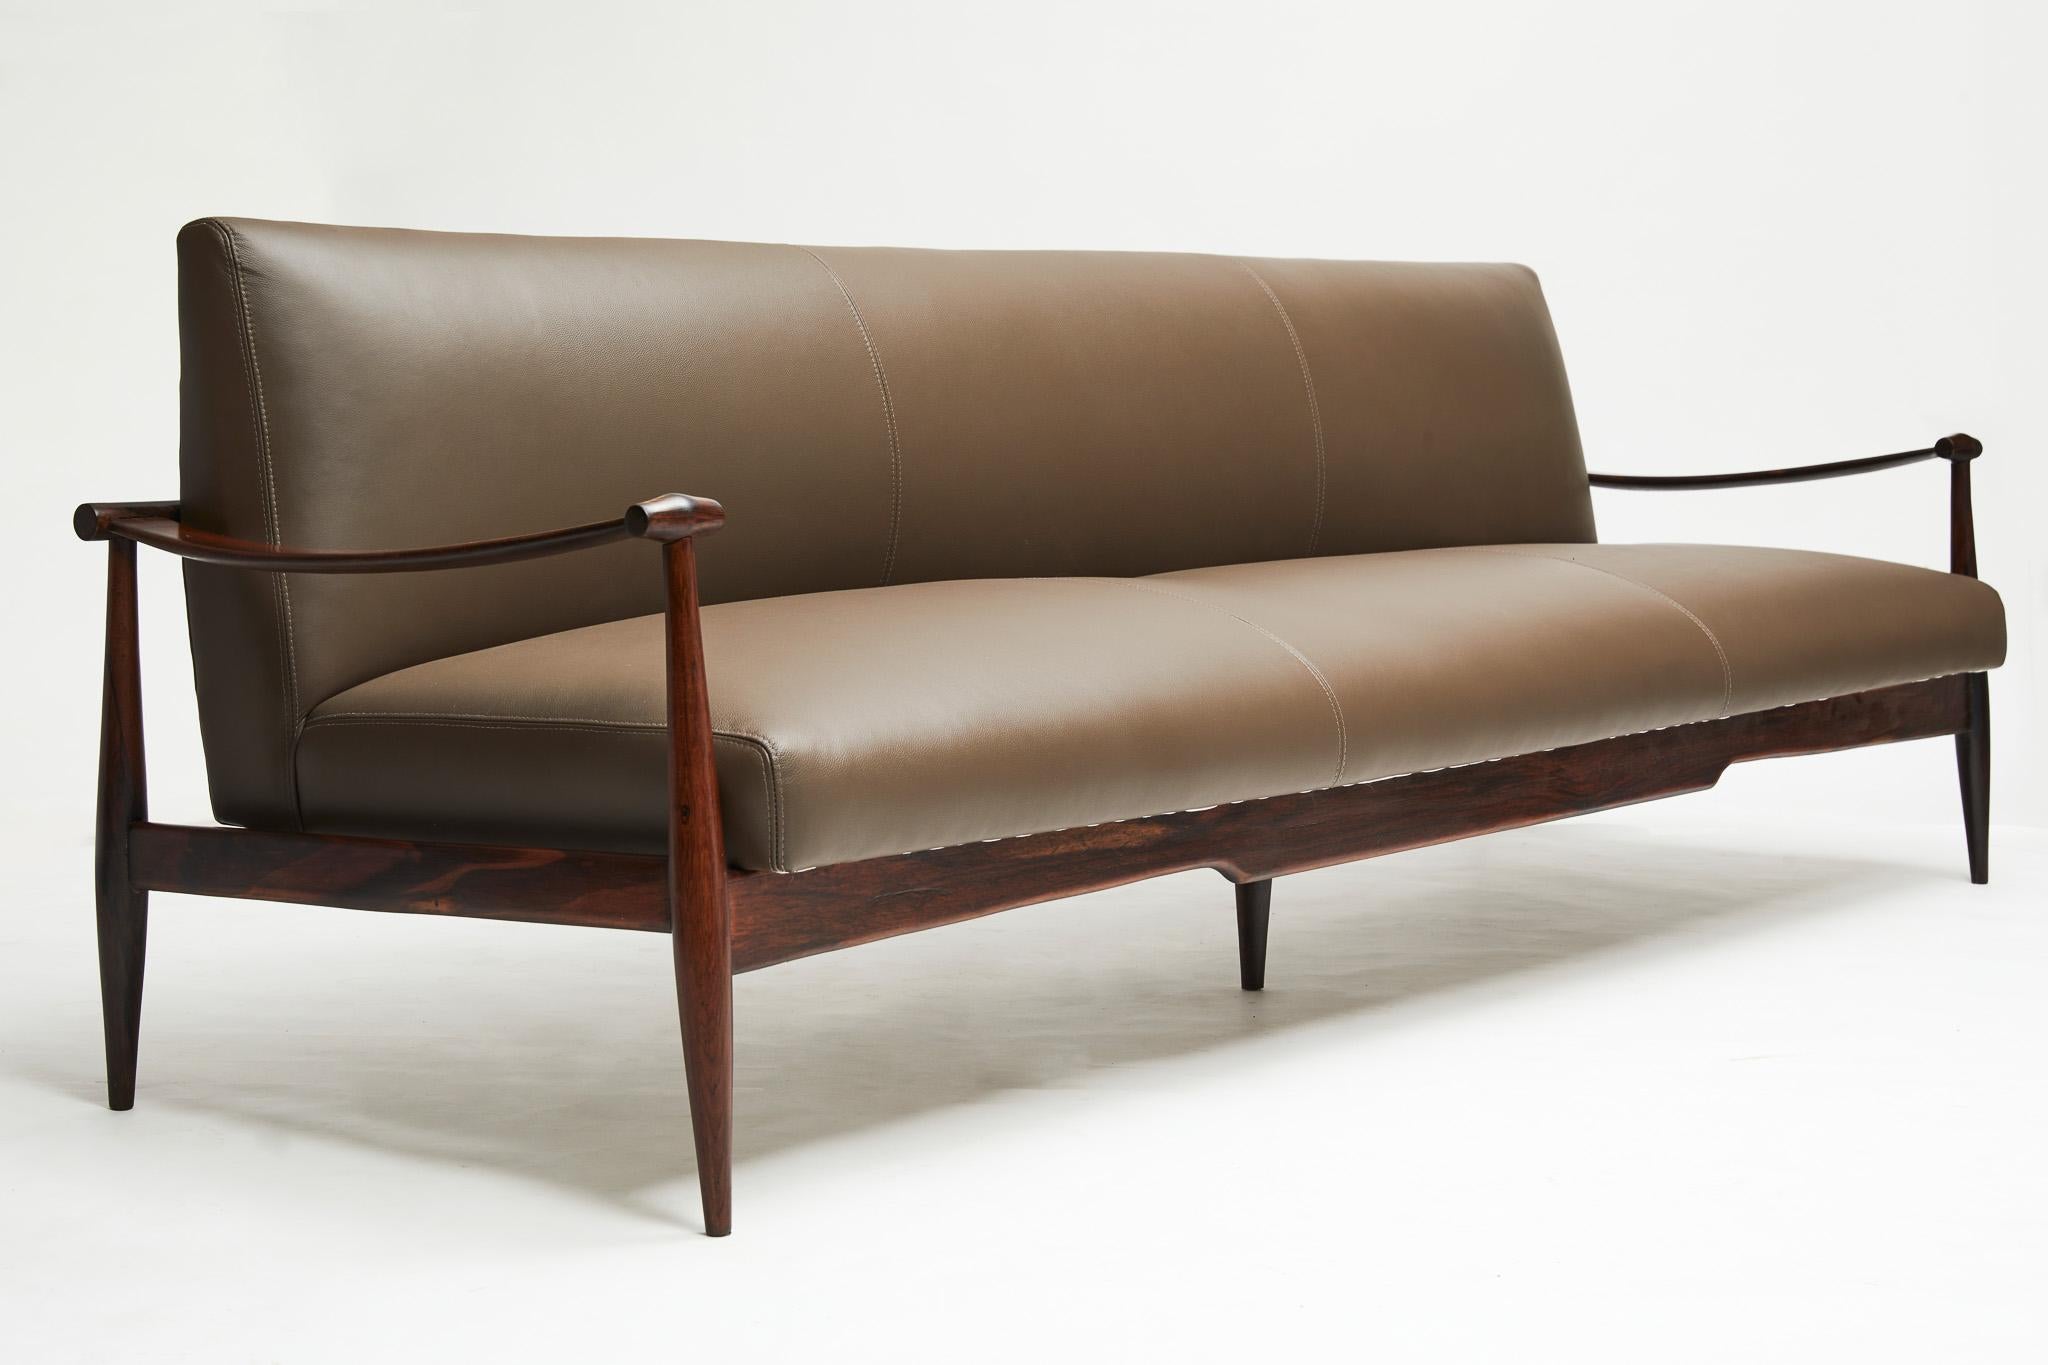 Brazilian Modern Sofa in Hardwood & Brown Leather by Liceu De Artes 1960 In Good Condition For Sale In New York, NY